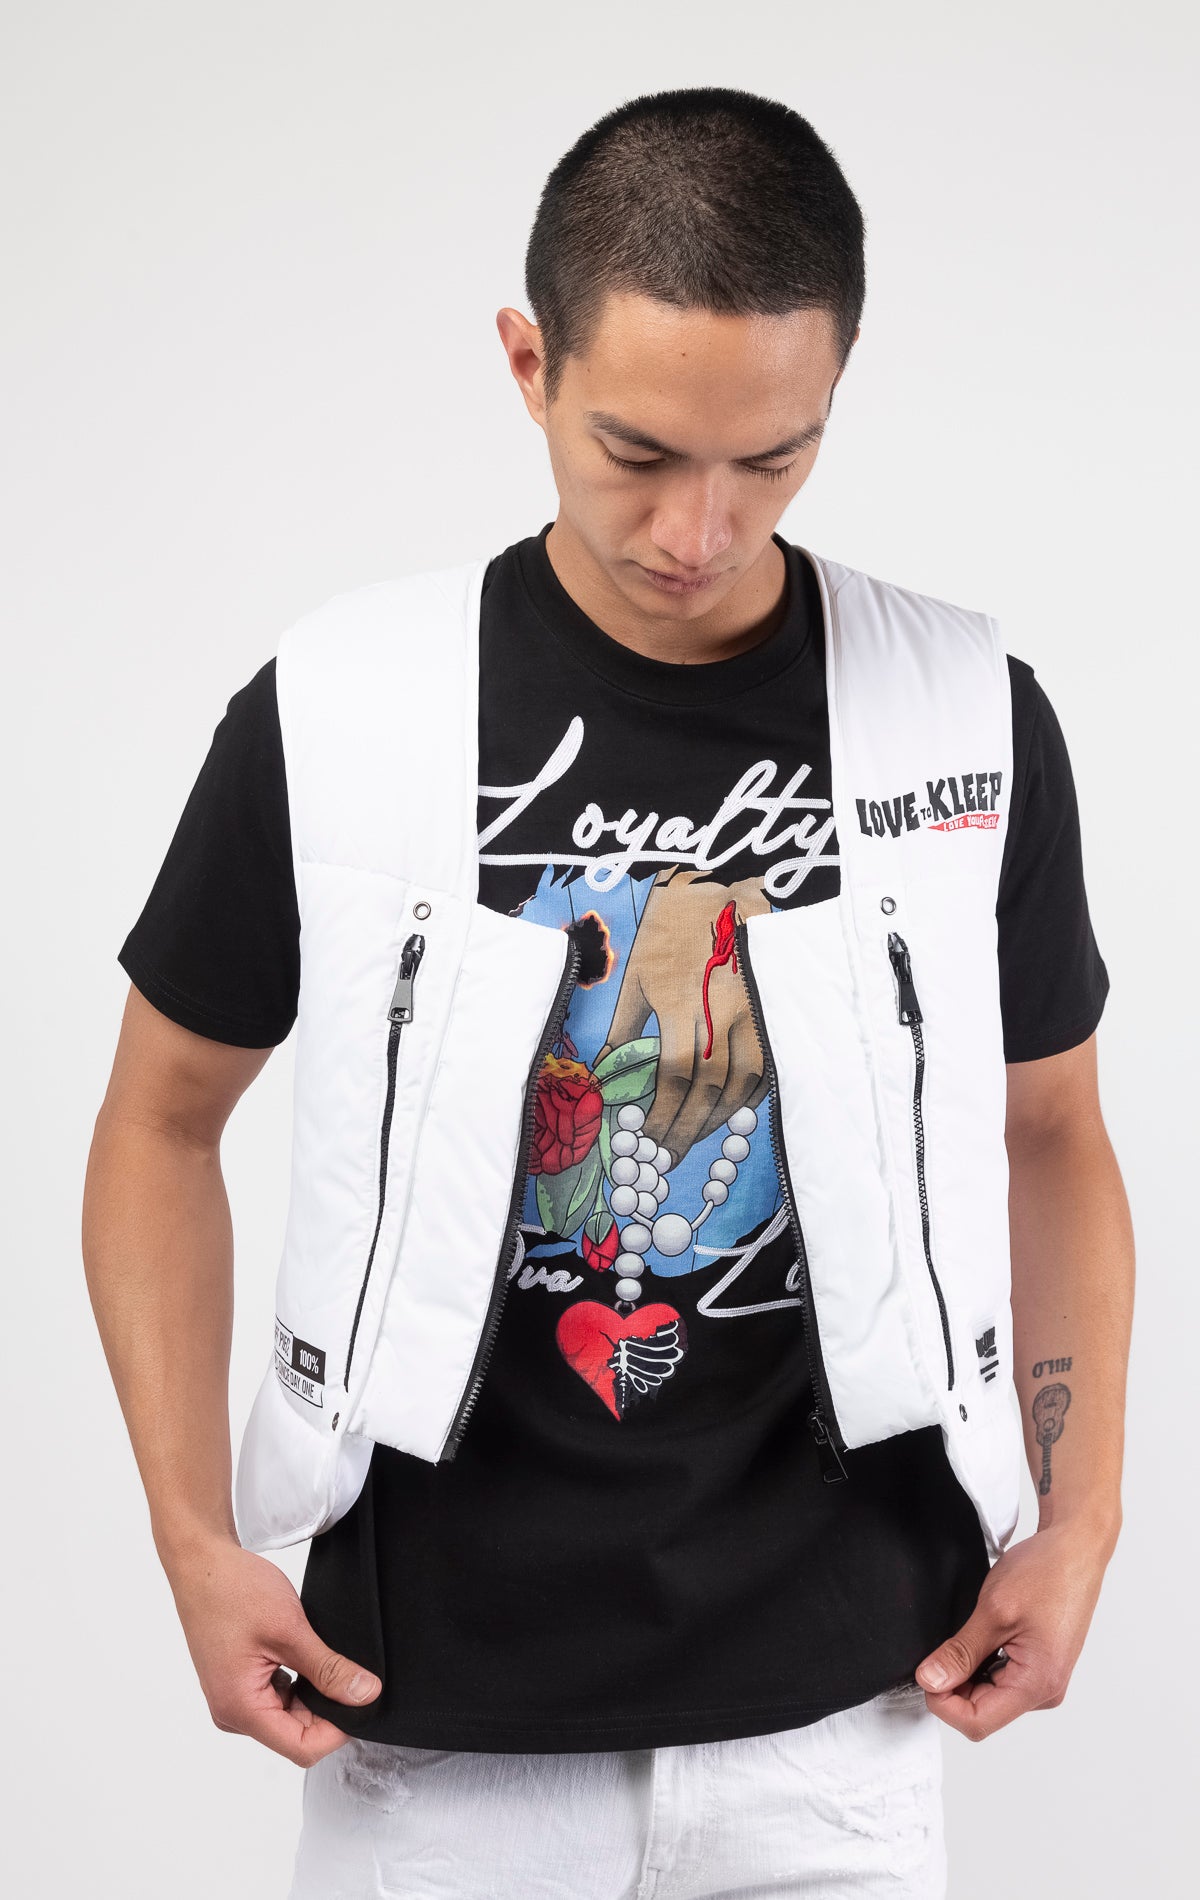 White Premium Cire Padded Vest with 2oz of padding, adjustable straps, and functional front and back pockets. Back features a PHRESH(FRESH) screen print, while the front showcases a Love to Kleep logo and clear rubber patch.